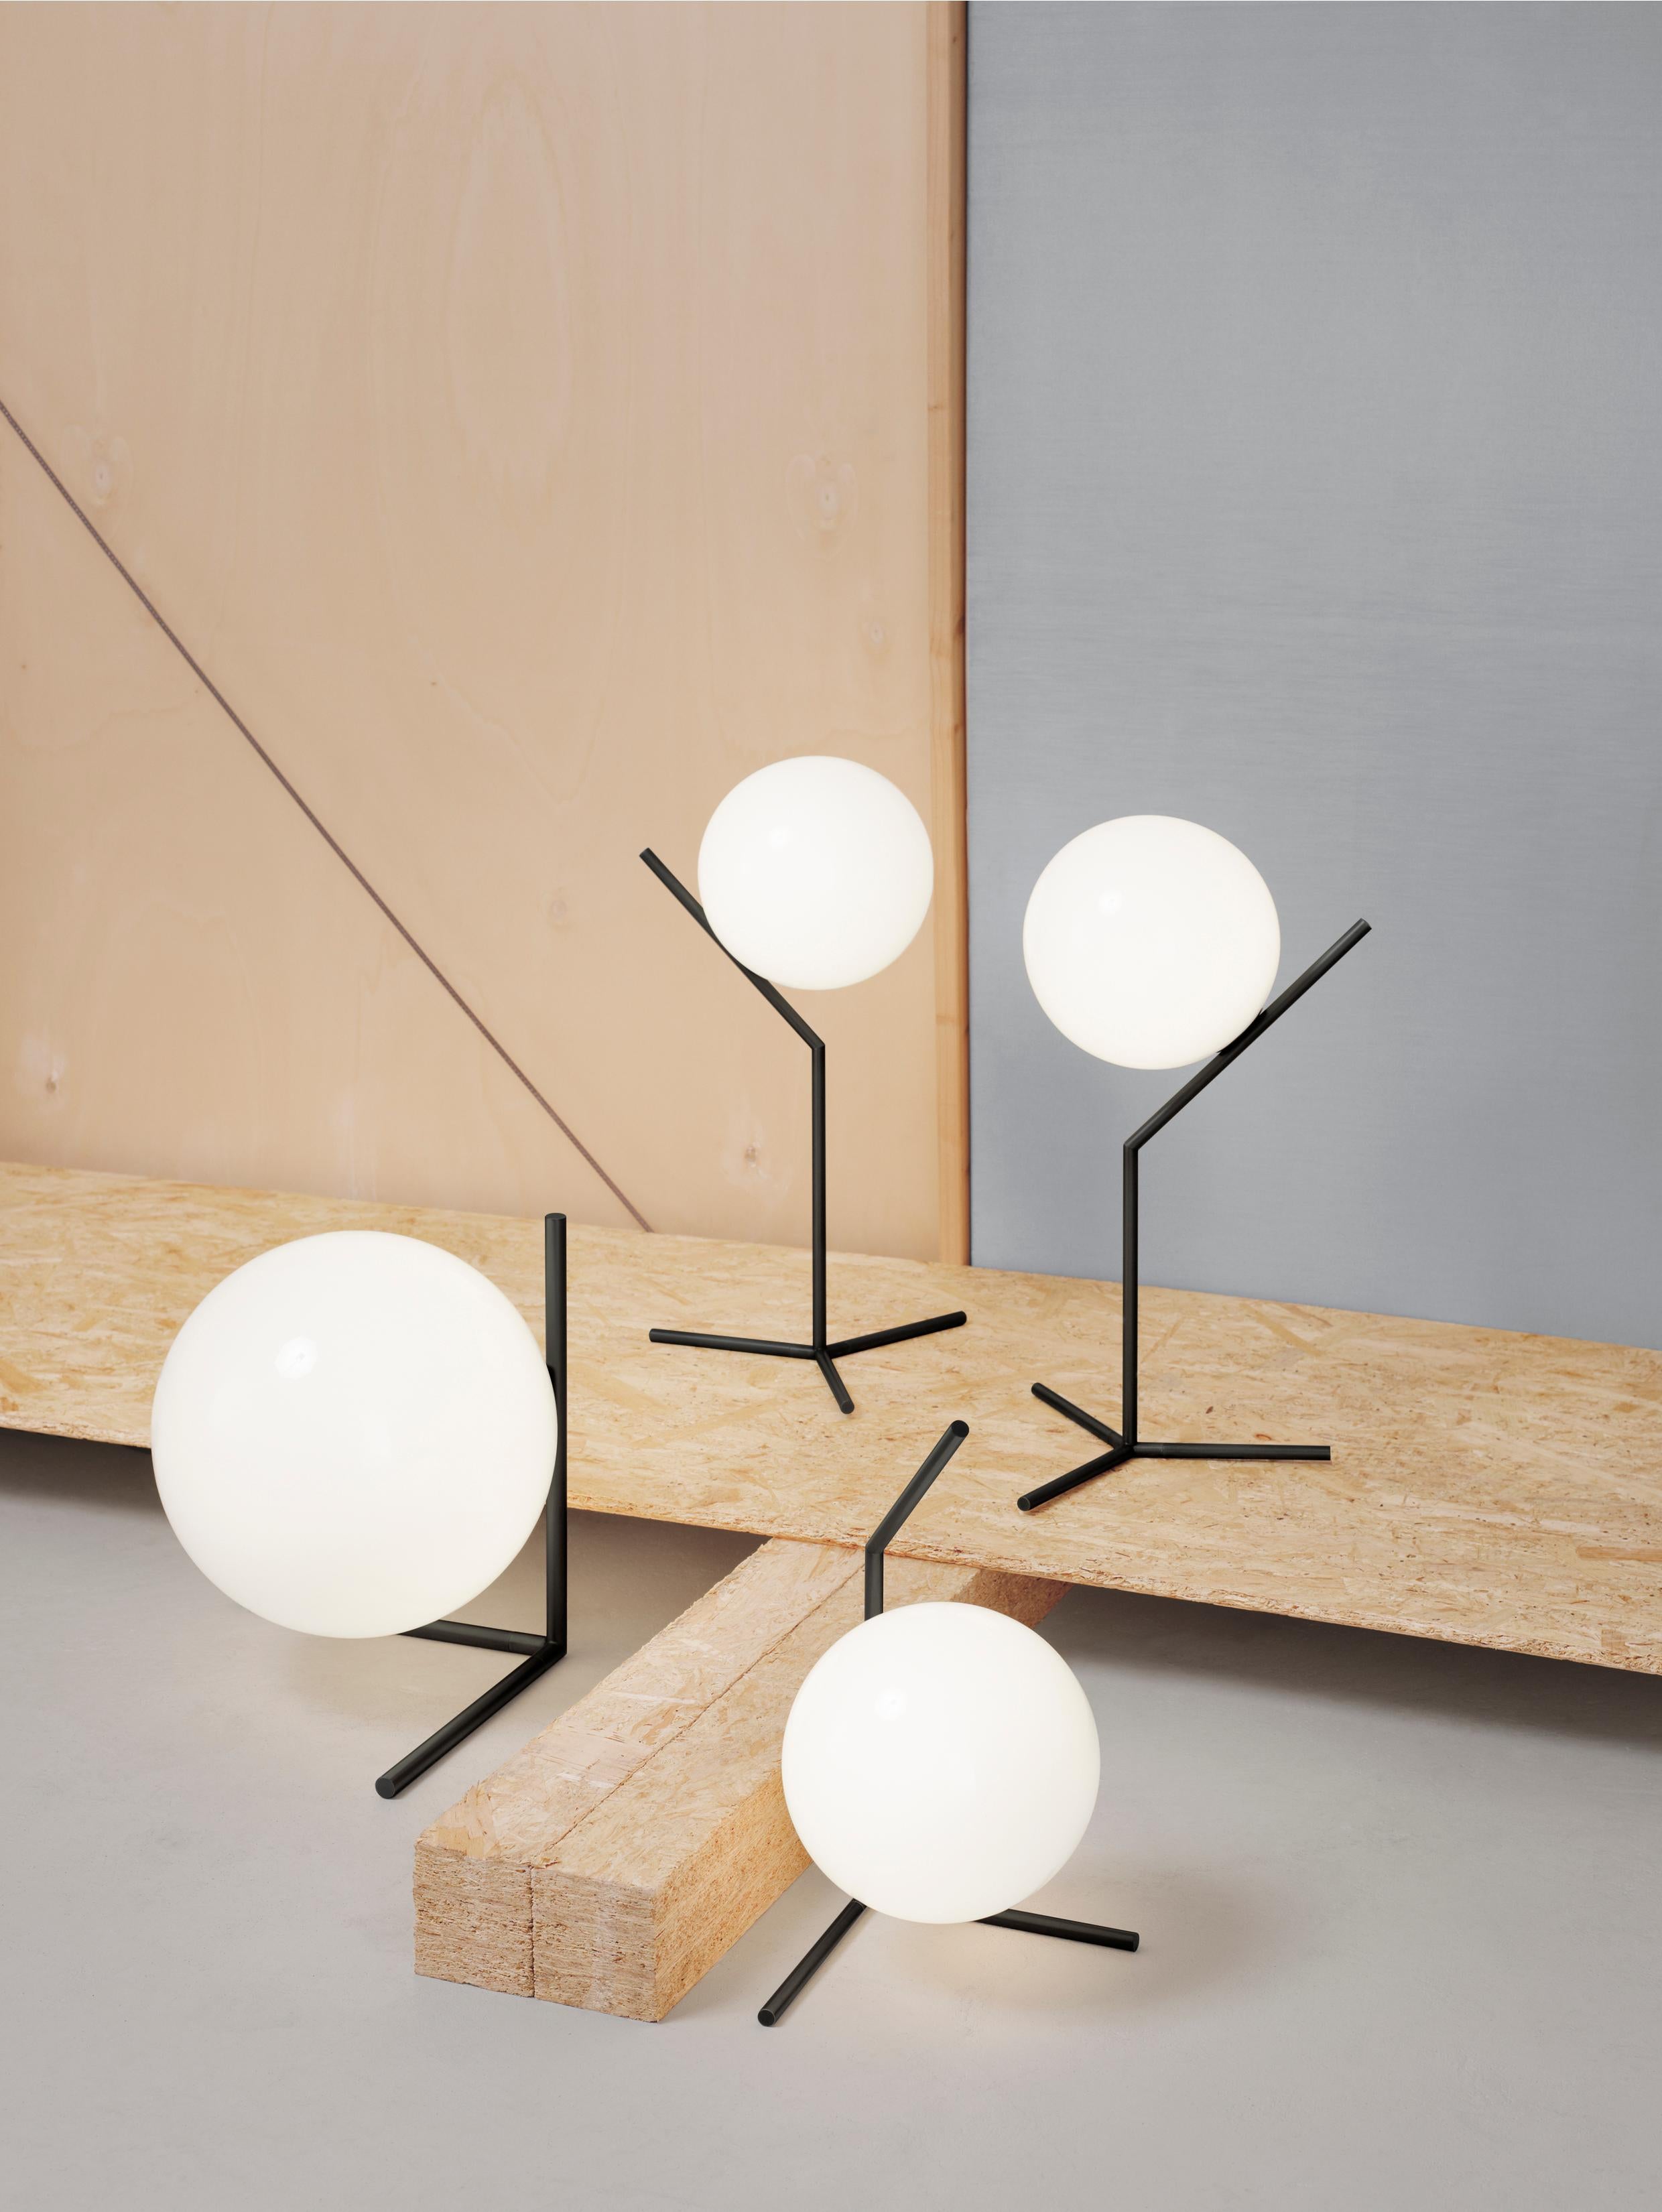 Like the other pieces in his IC Light Series, the IC Lights T balances designer Michael Anastassiades’ love of industrial simplicity with intricate symbolism. It provides diffused light through a mouth blown opaline sphere, which is held up by a